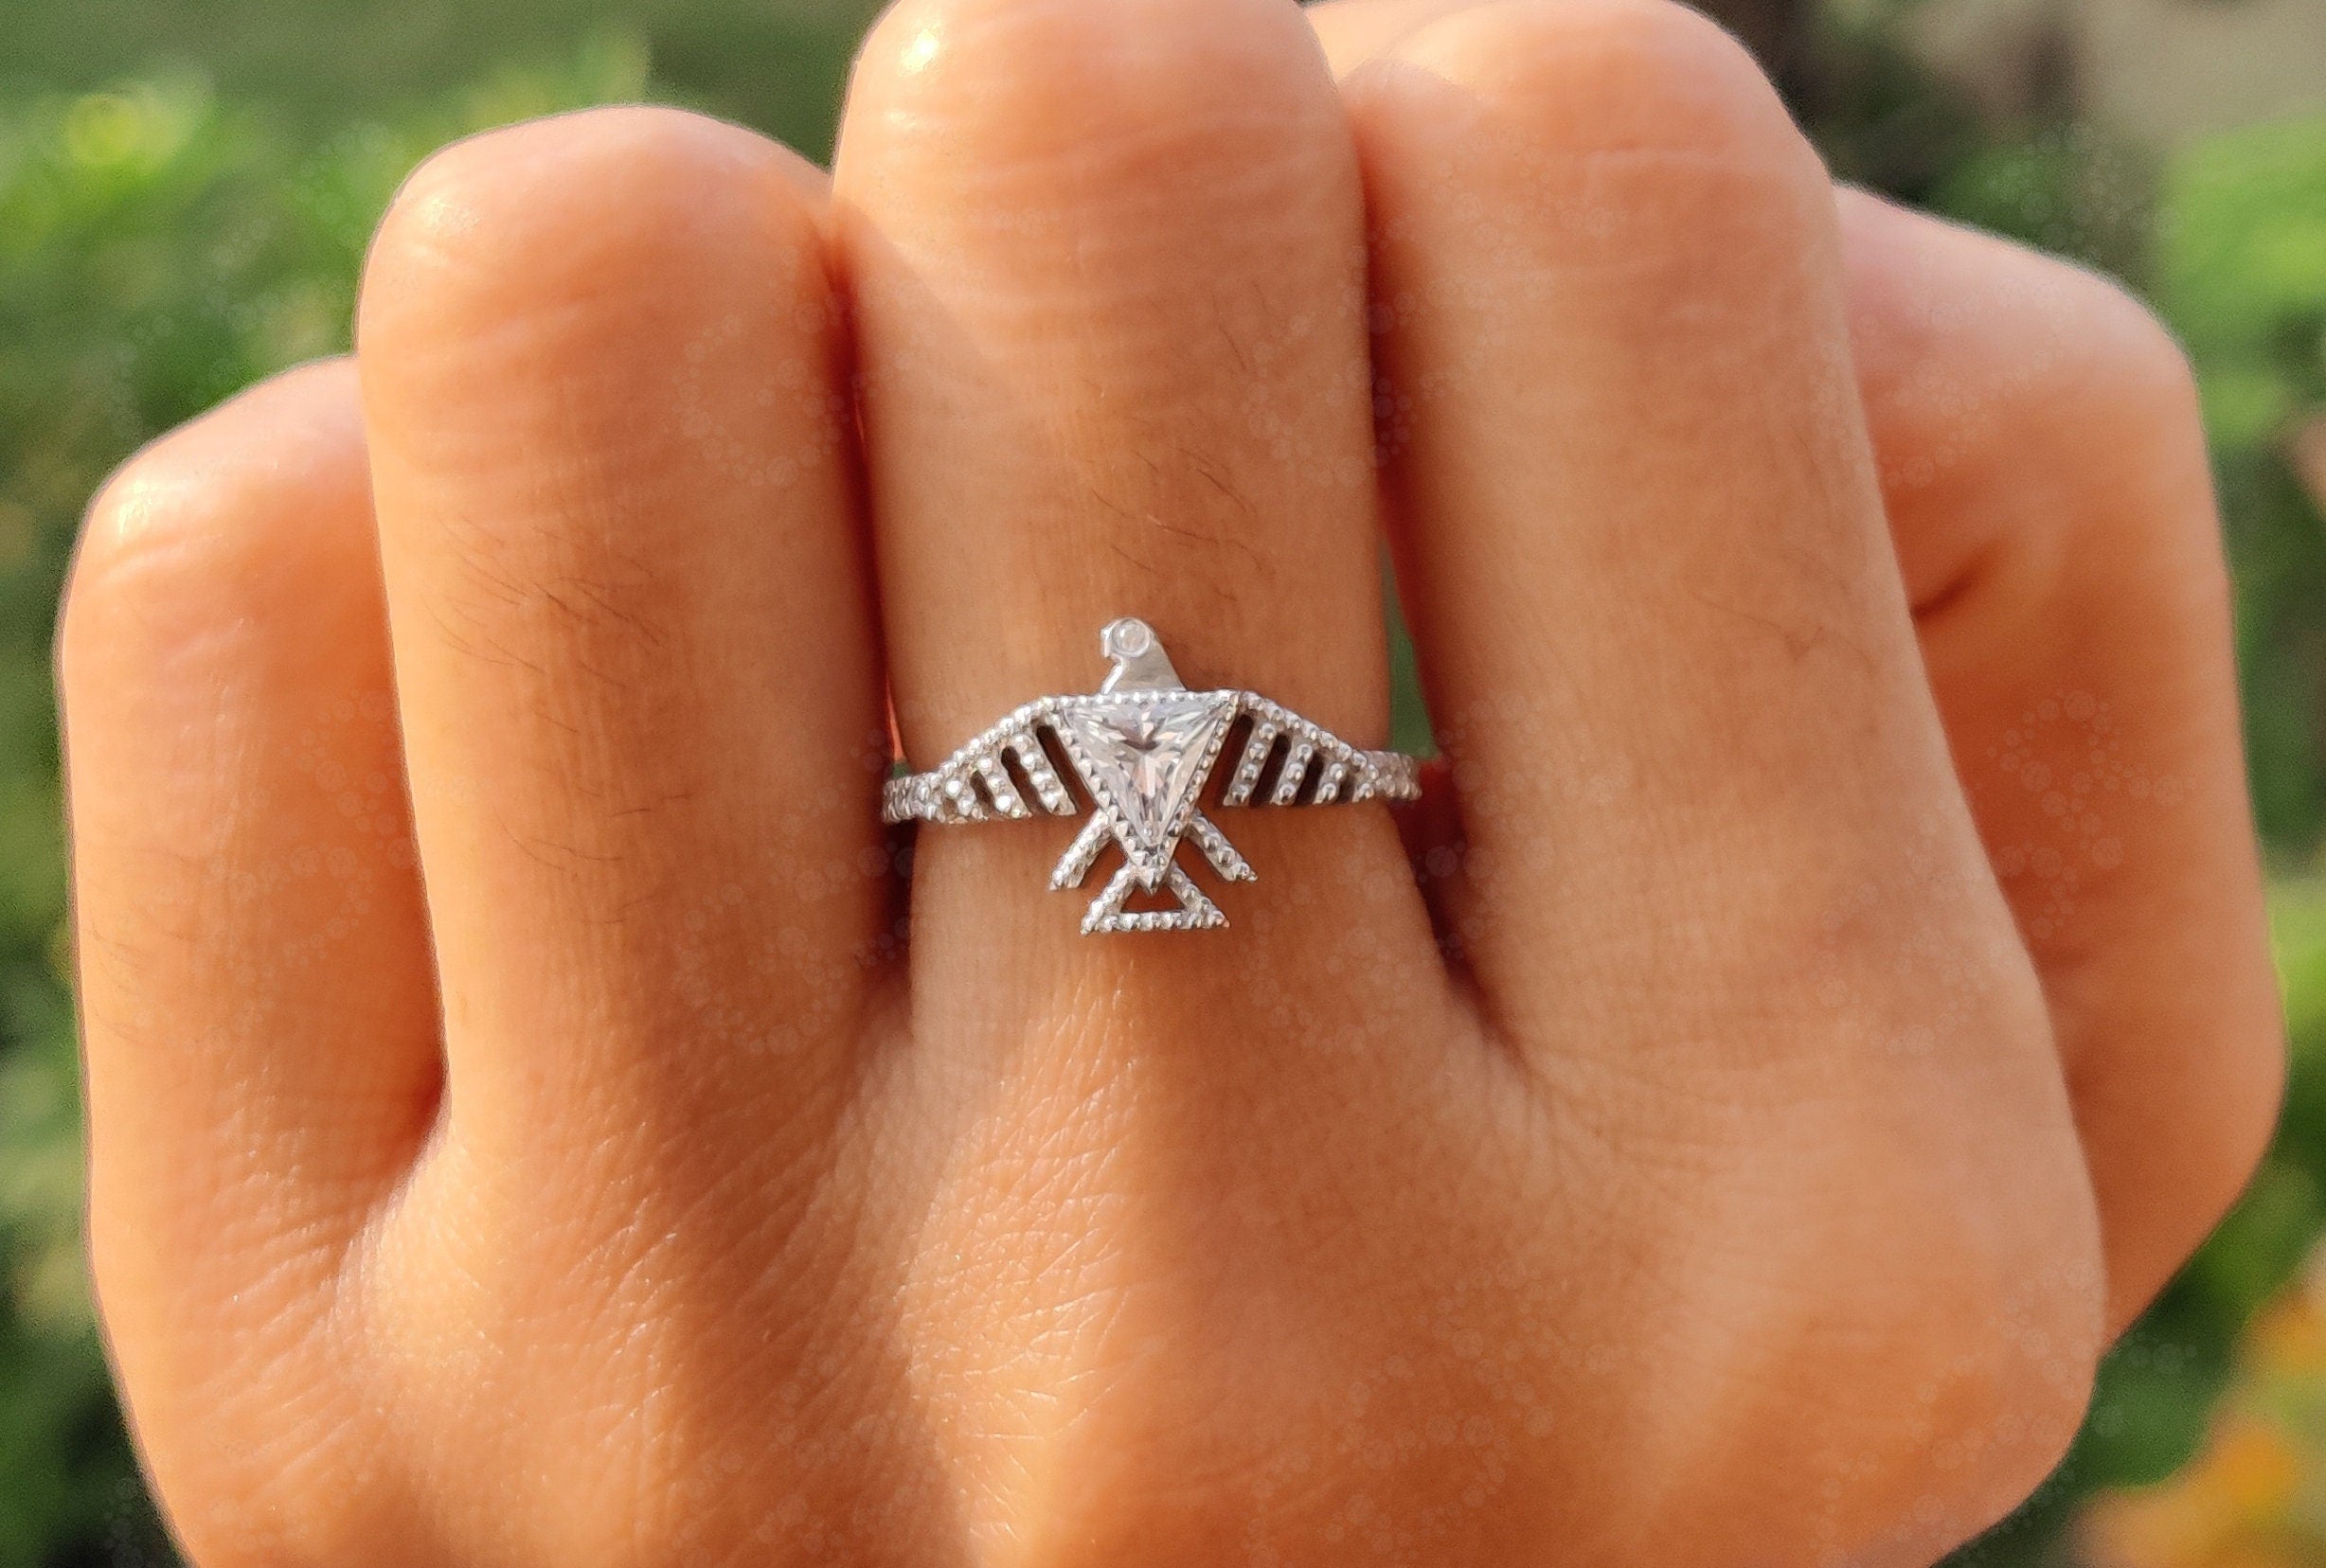 Eagle Spirit Soars: Native American Eagle Phoenix Ring – A Silver and Gold Moissanite Ring Featuring Majestic Eagle Symbolism, Perfect as a Unique Jewelry Piece, a Dainty Minimalist Ring for a Symbolic Touch